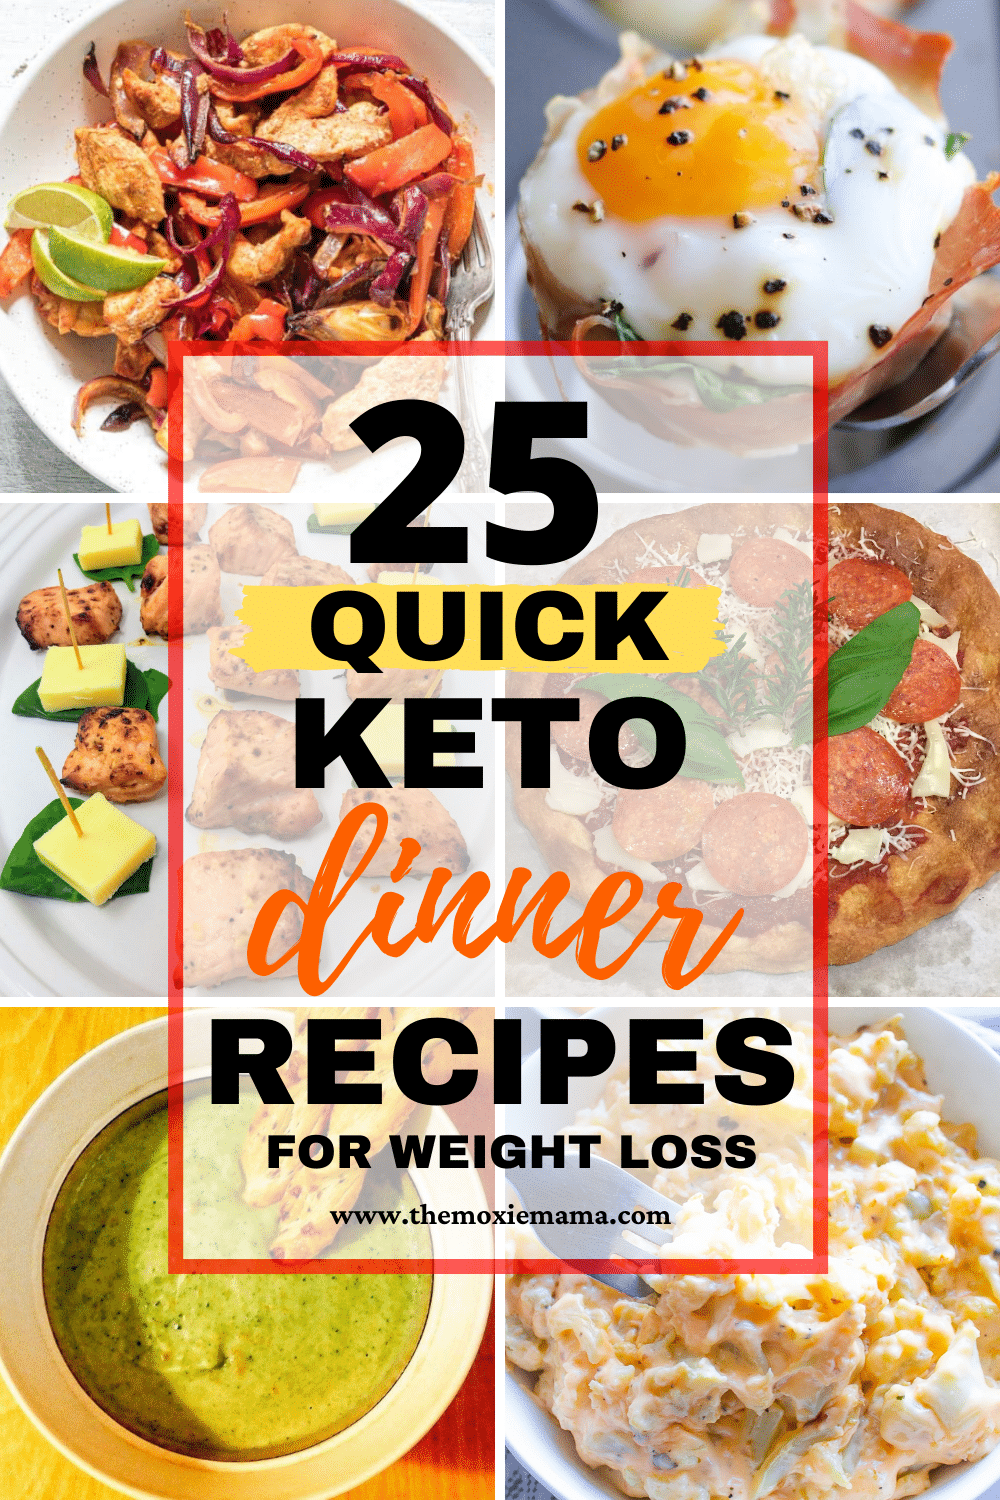 25 Quick Keto Dinner Recipes For Weight Loss | The Moxie Mama